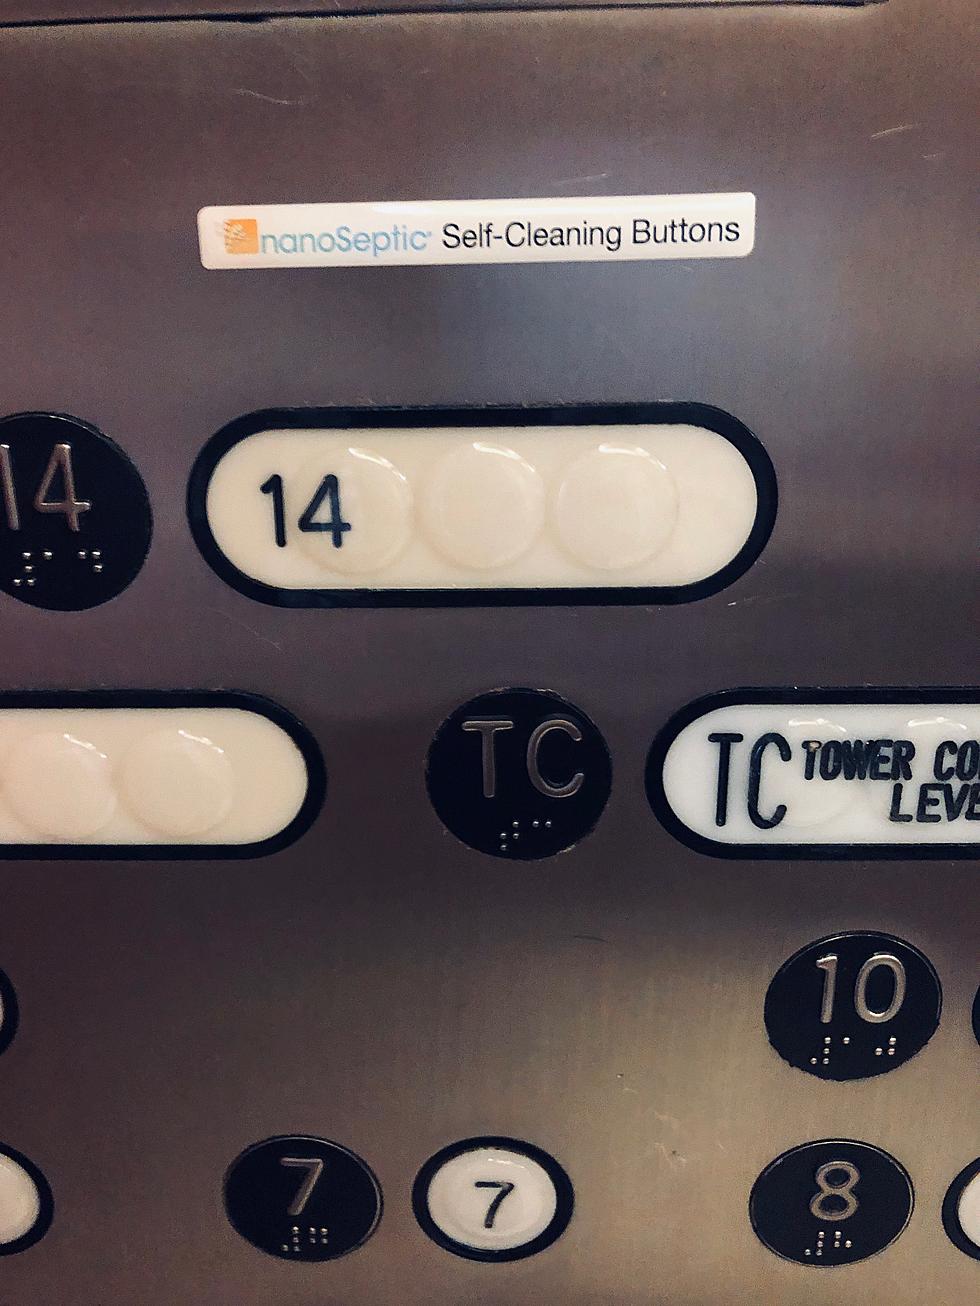 At Resorts Casino Hotel, The Elevator Buttons Are Self-Cleaning